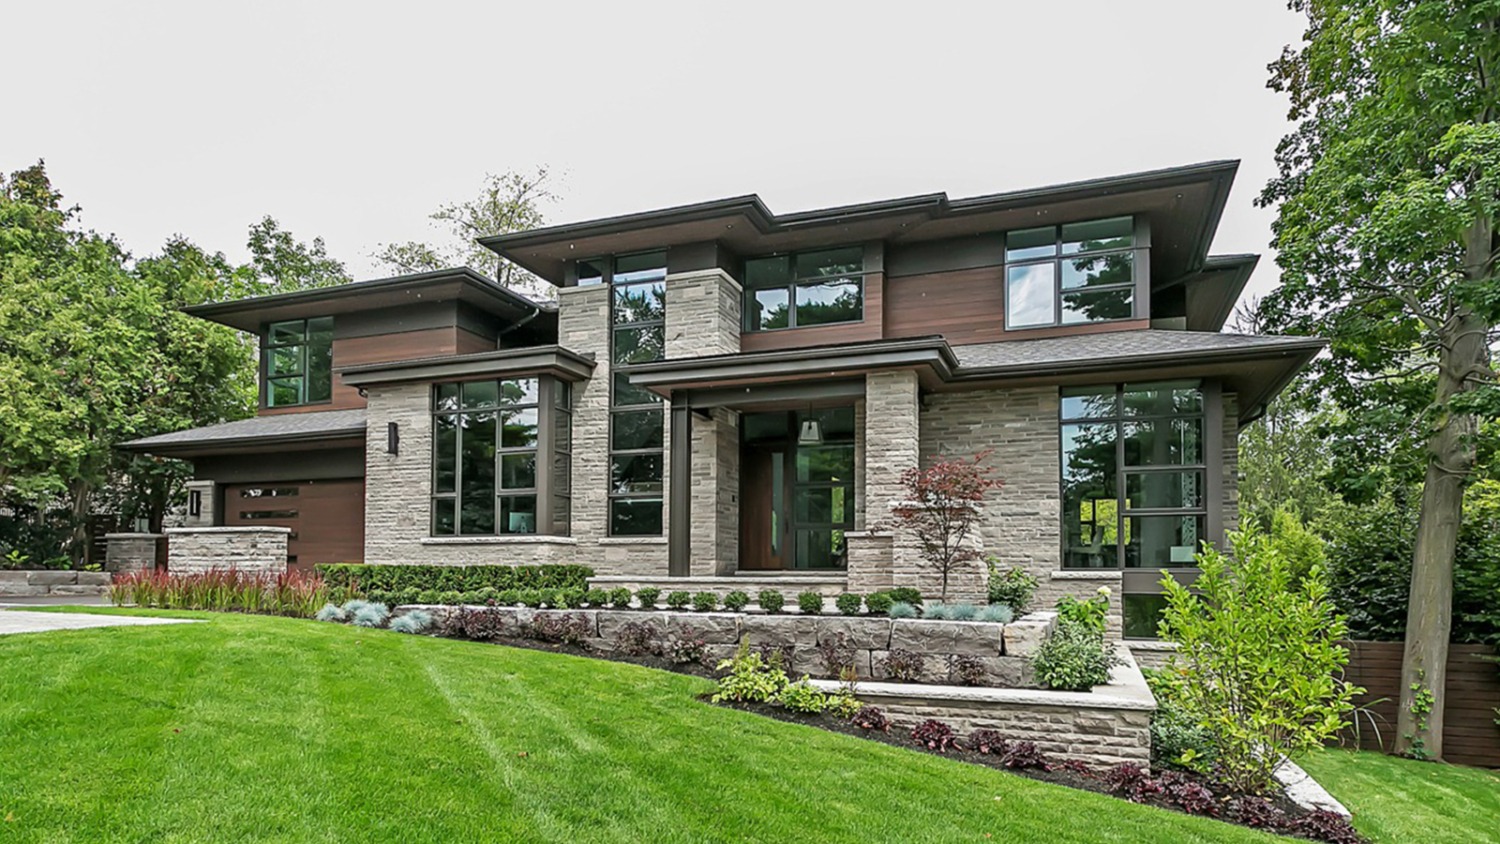 Contemporary home with natural stone, wood siding and corner windows.